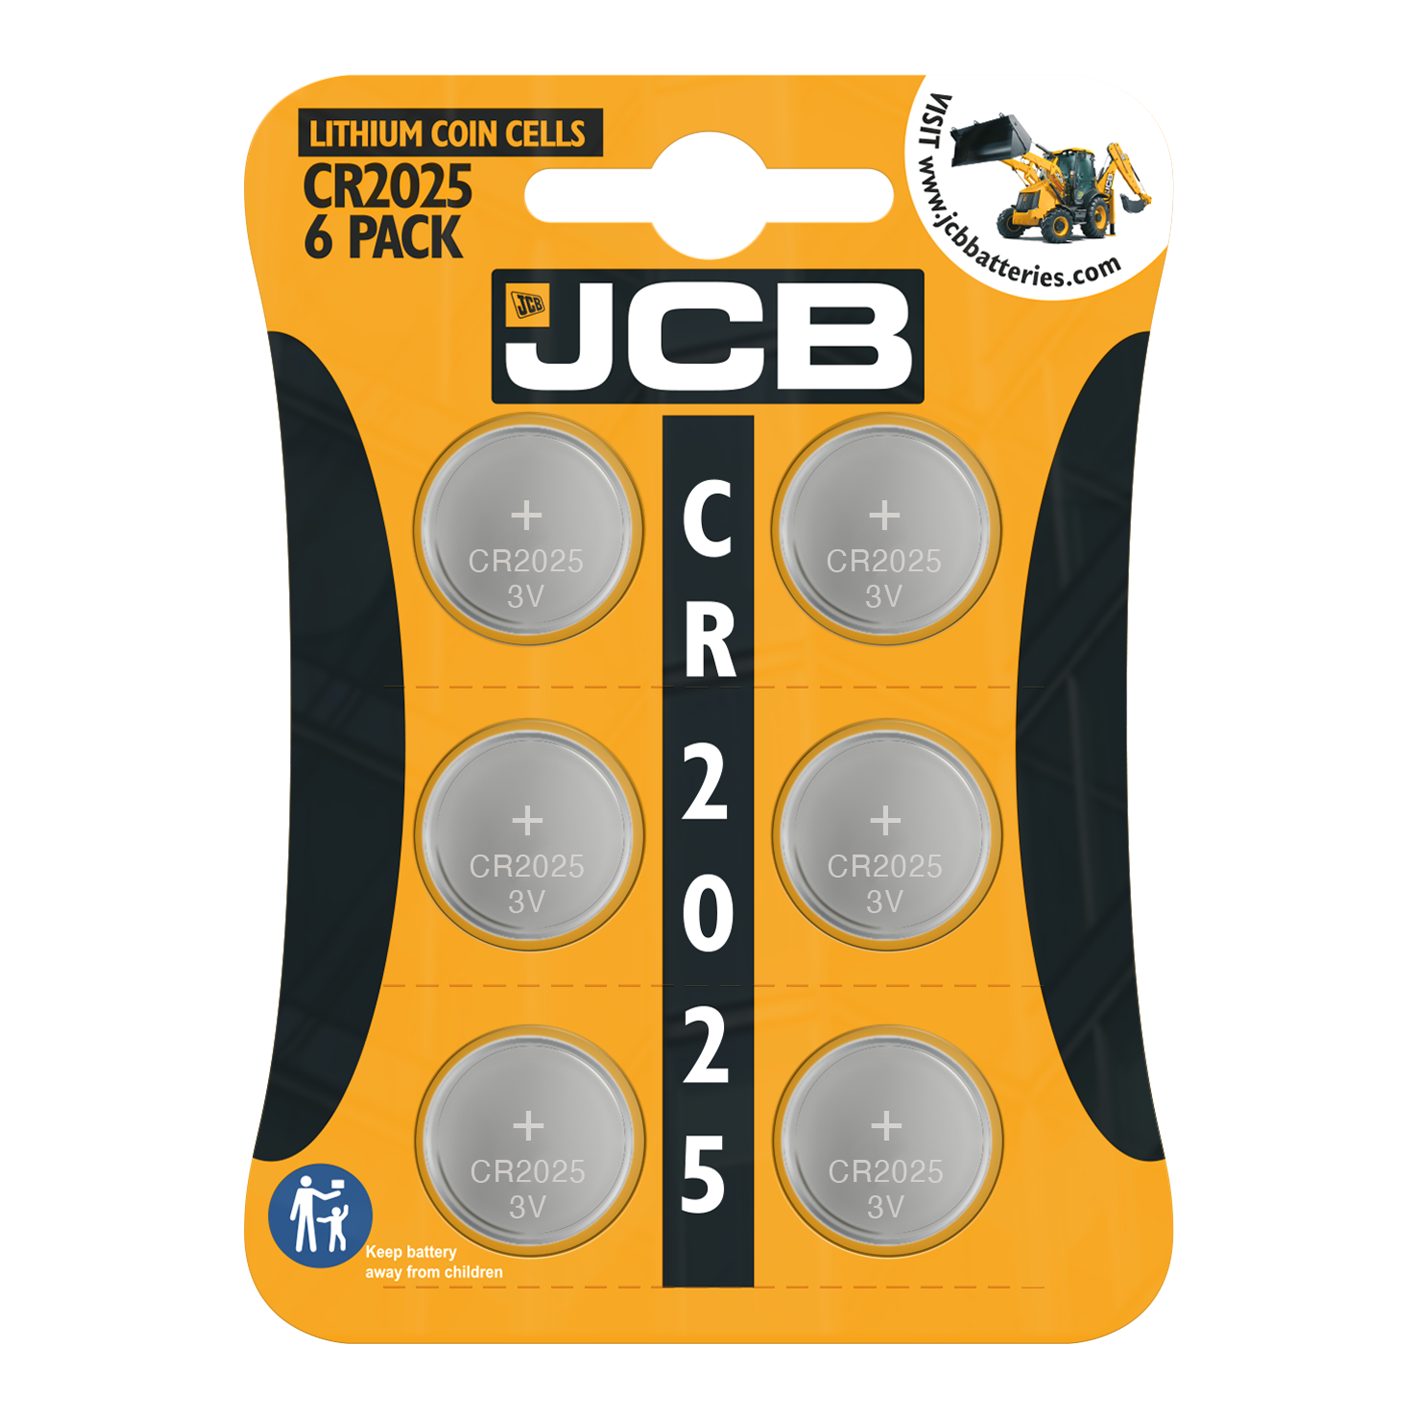 JCB CR2025 Lithium Coin Cell, Pack of 6